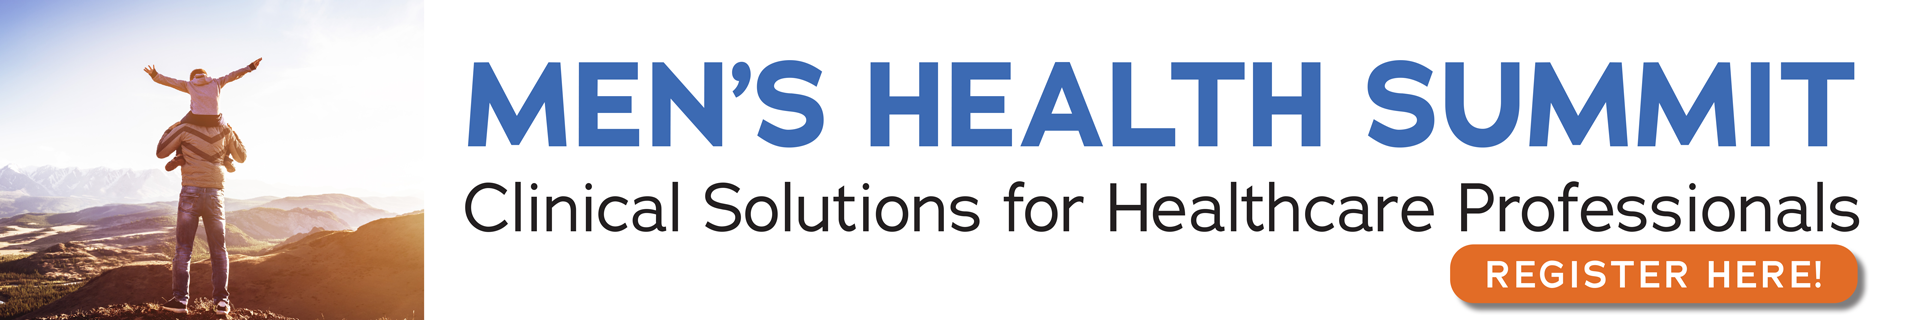 Men's Health: Clinical Solutions for Healthcare Professionals